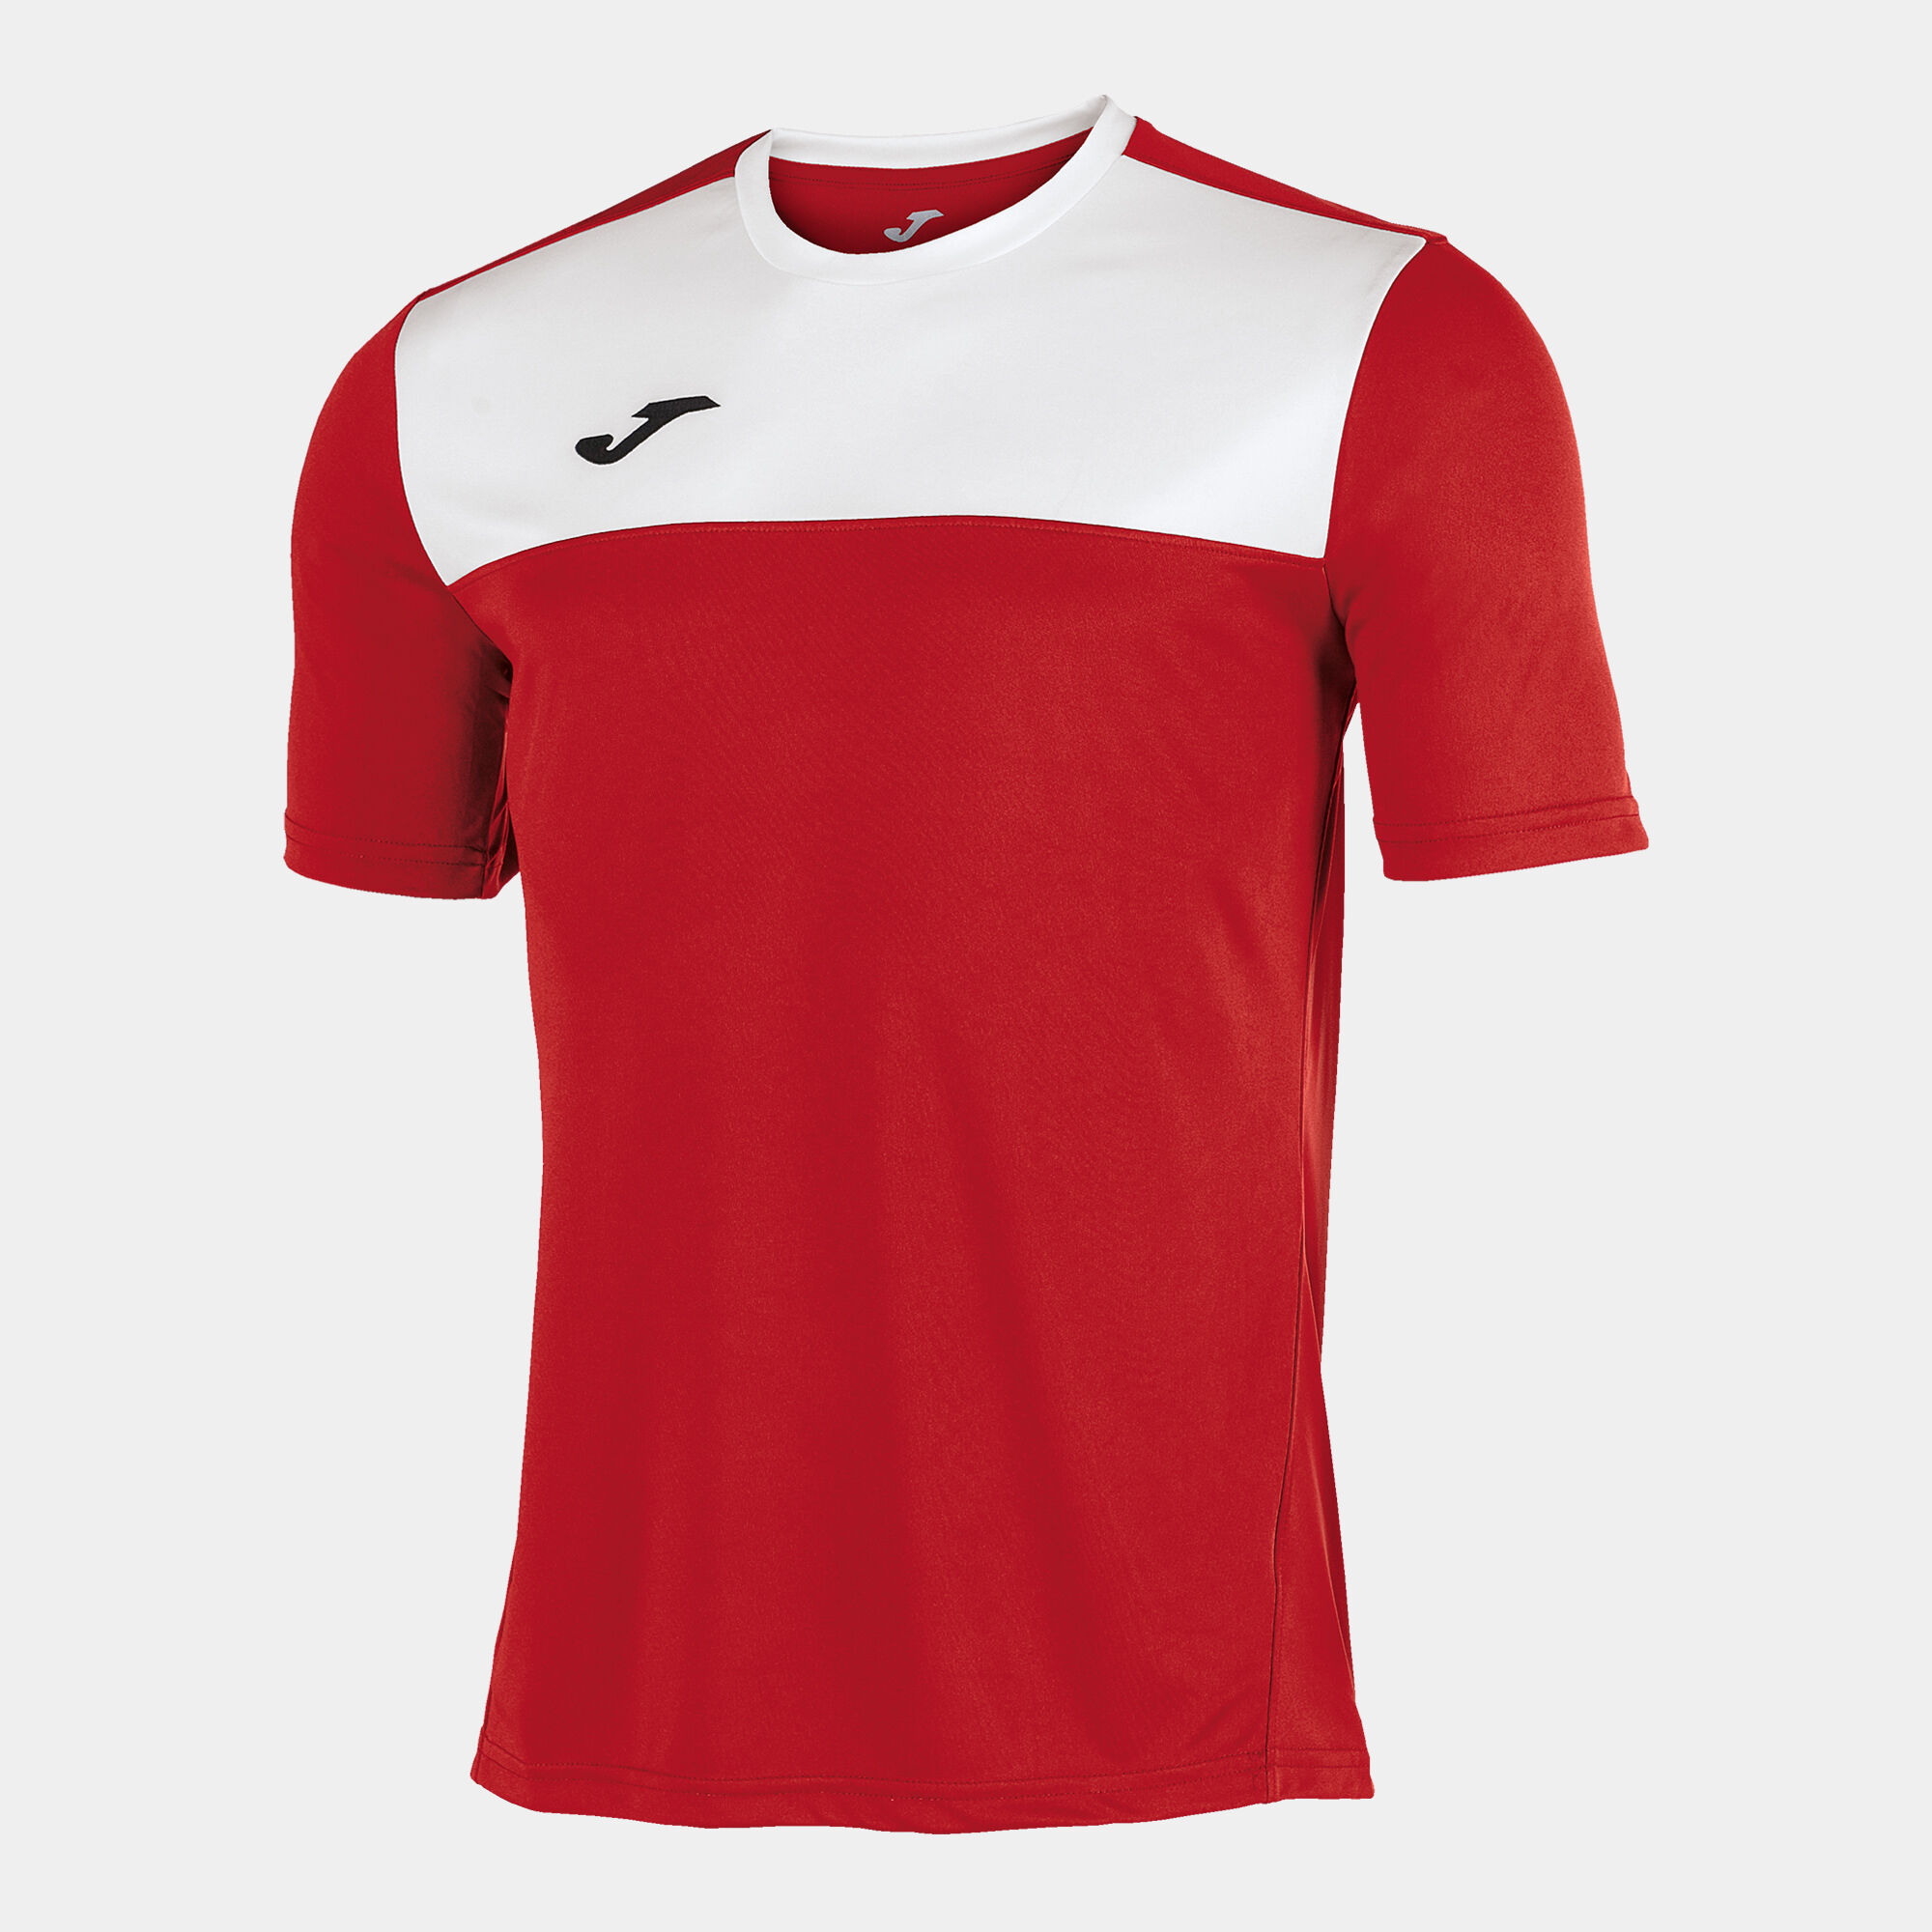 MAILLOT MANCHES COURTES HOMME WINNER ROUGE BLANC